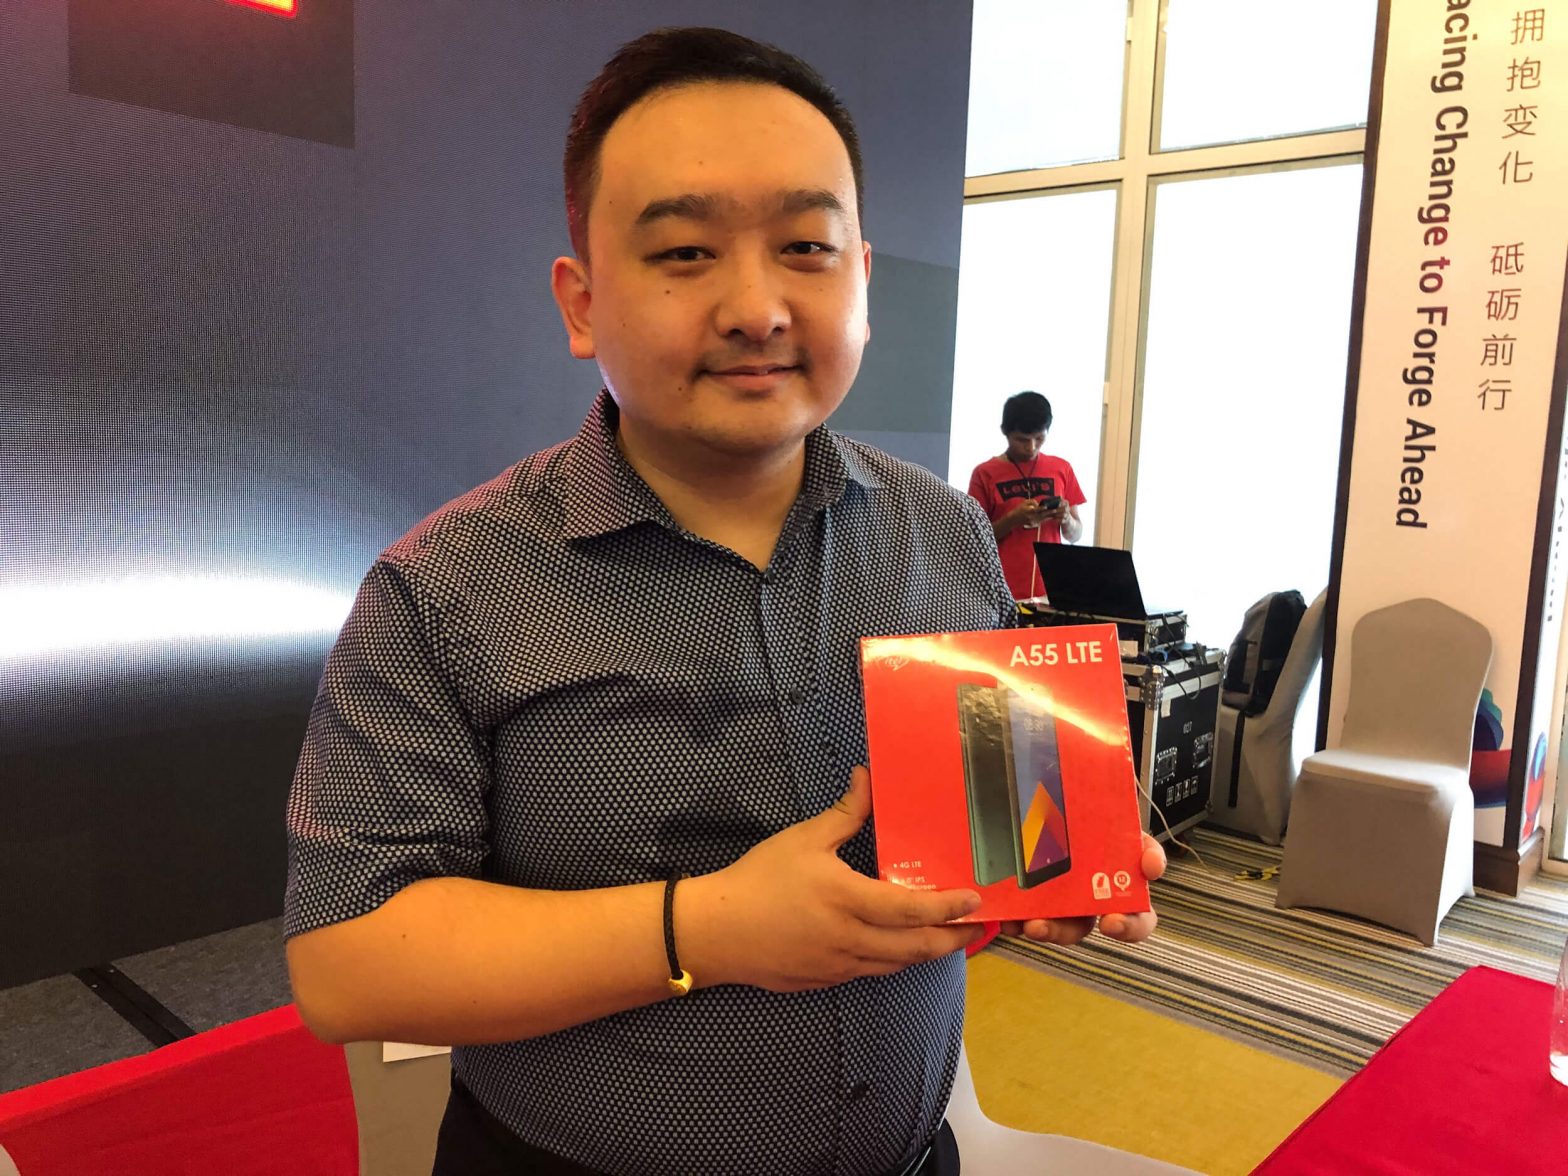 itel Country Manager Lei Zhang with the A 55